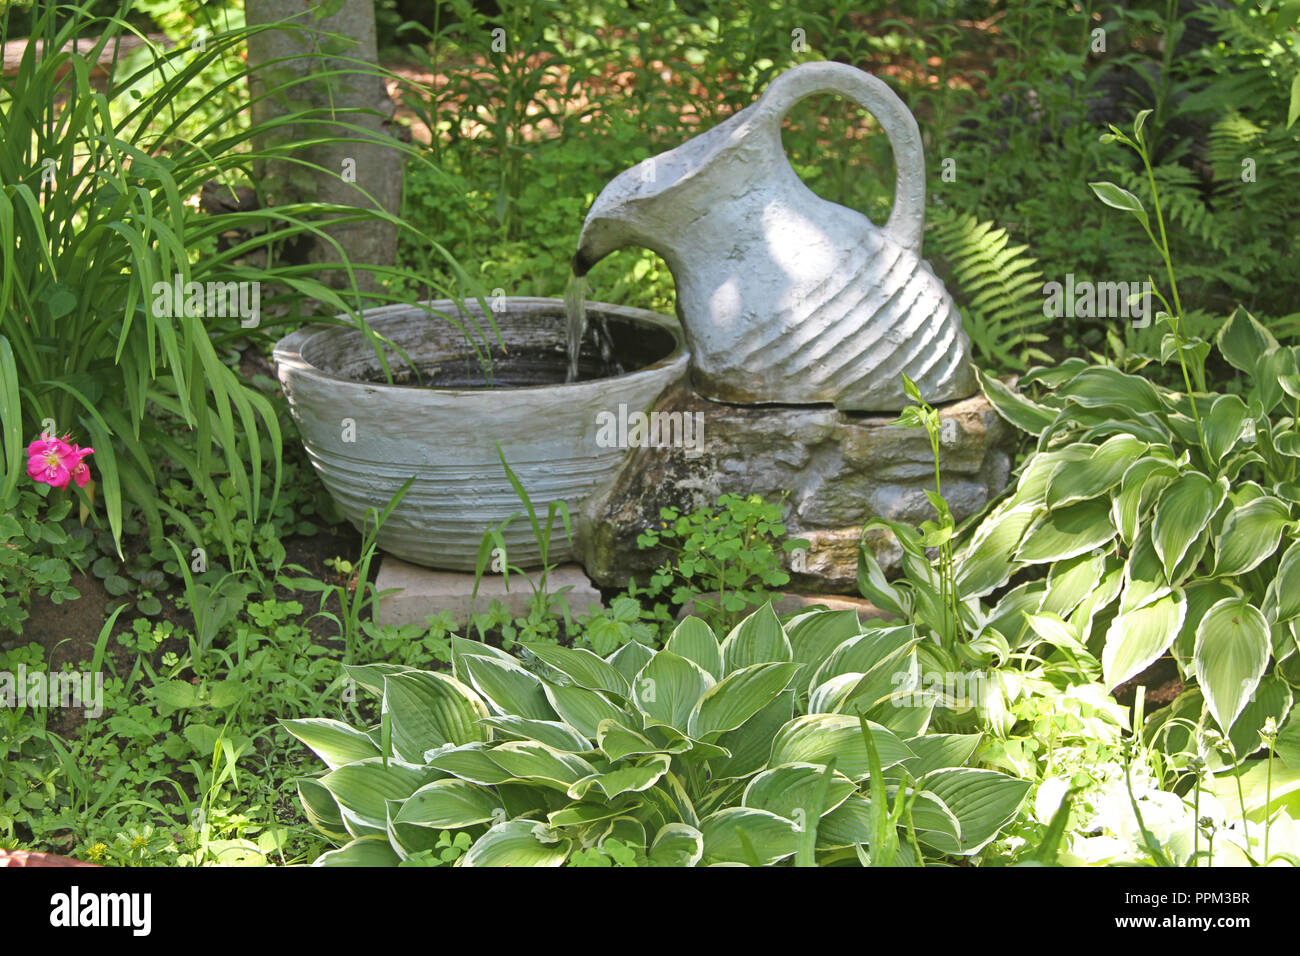 Outdoor urn with flowing water into bowl Stock Photo